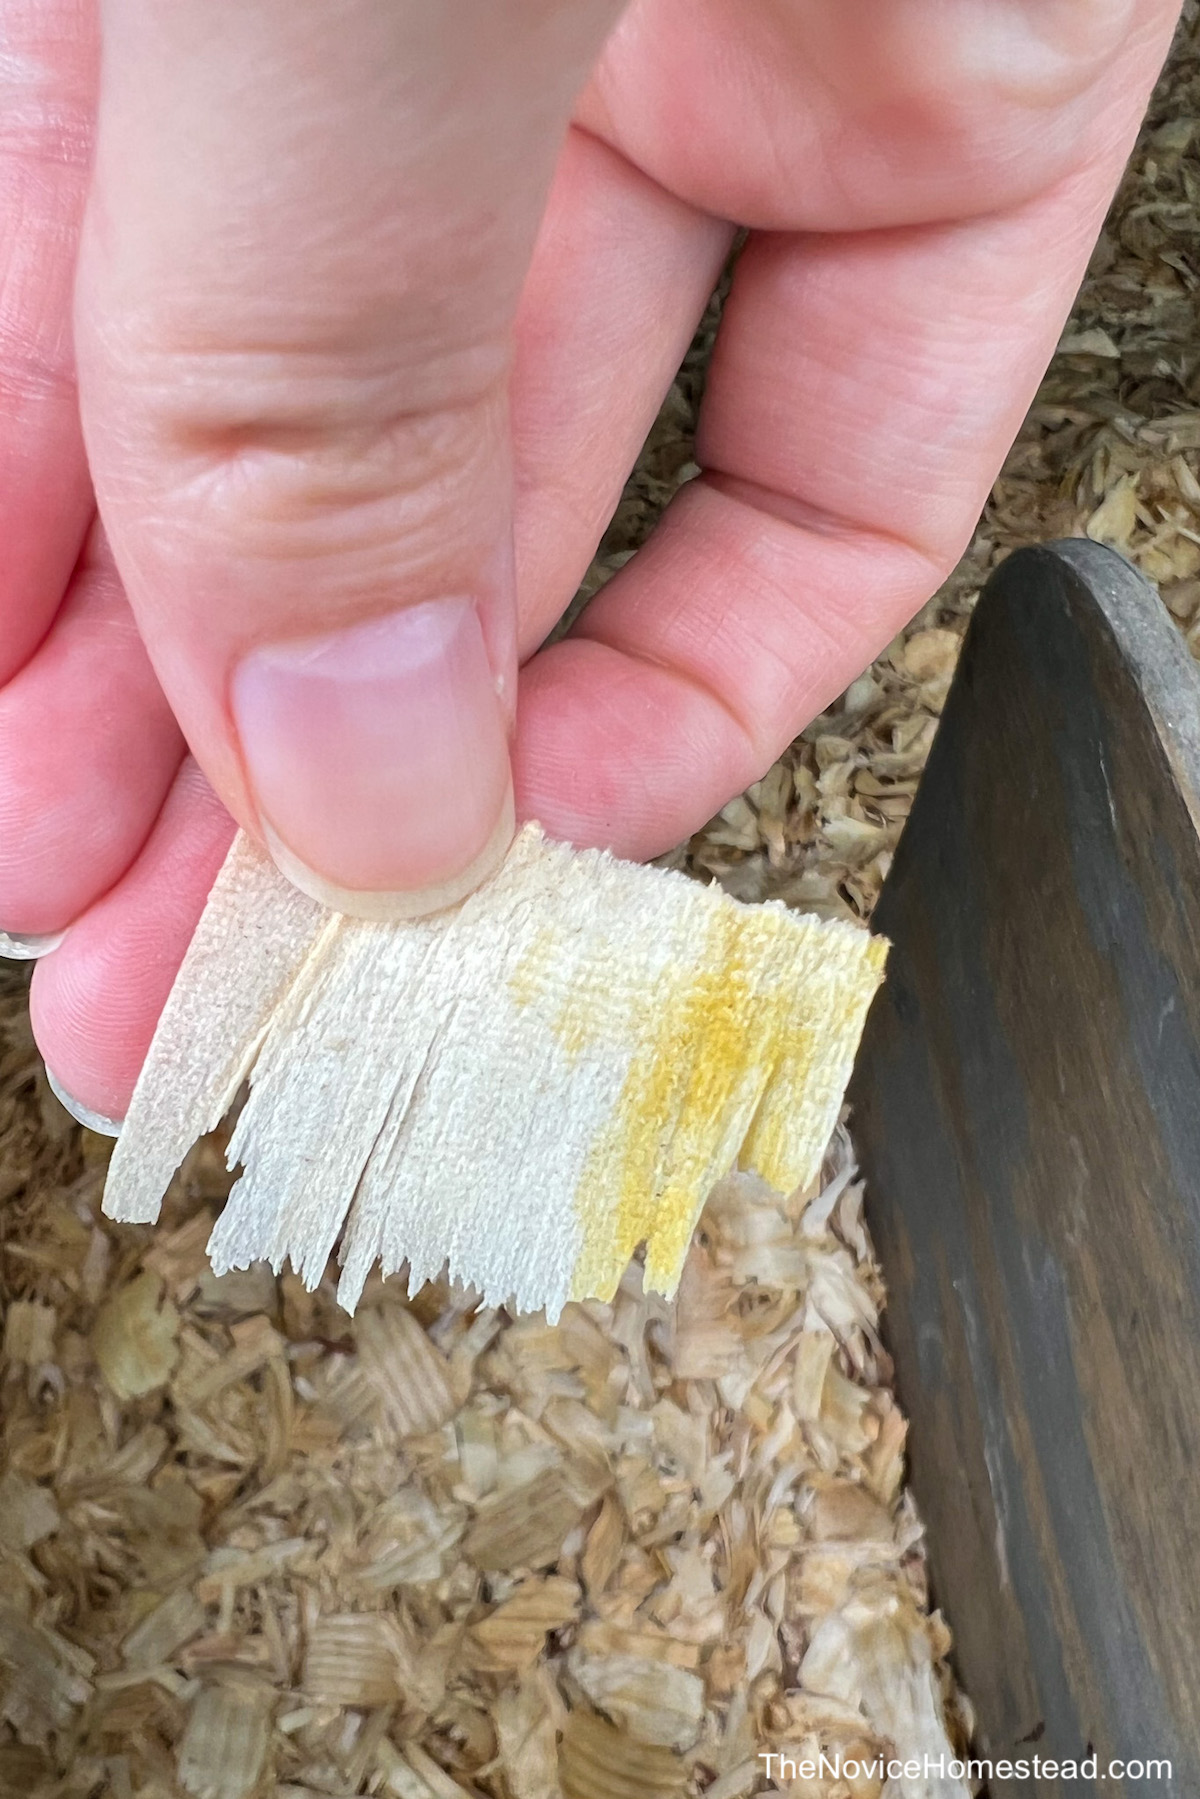 holding a piece of pine shaving, stained yellow by egg yolk